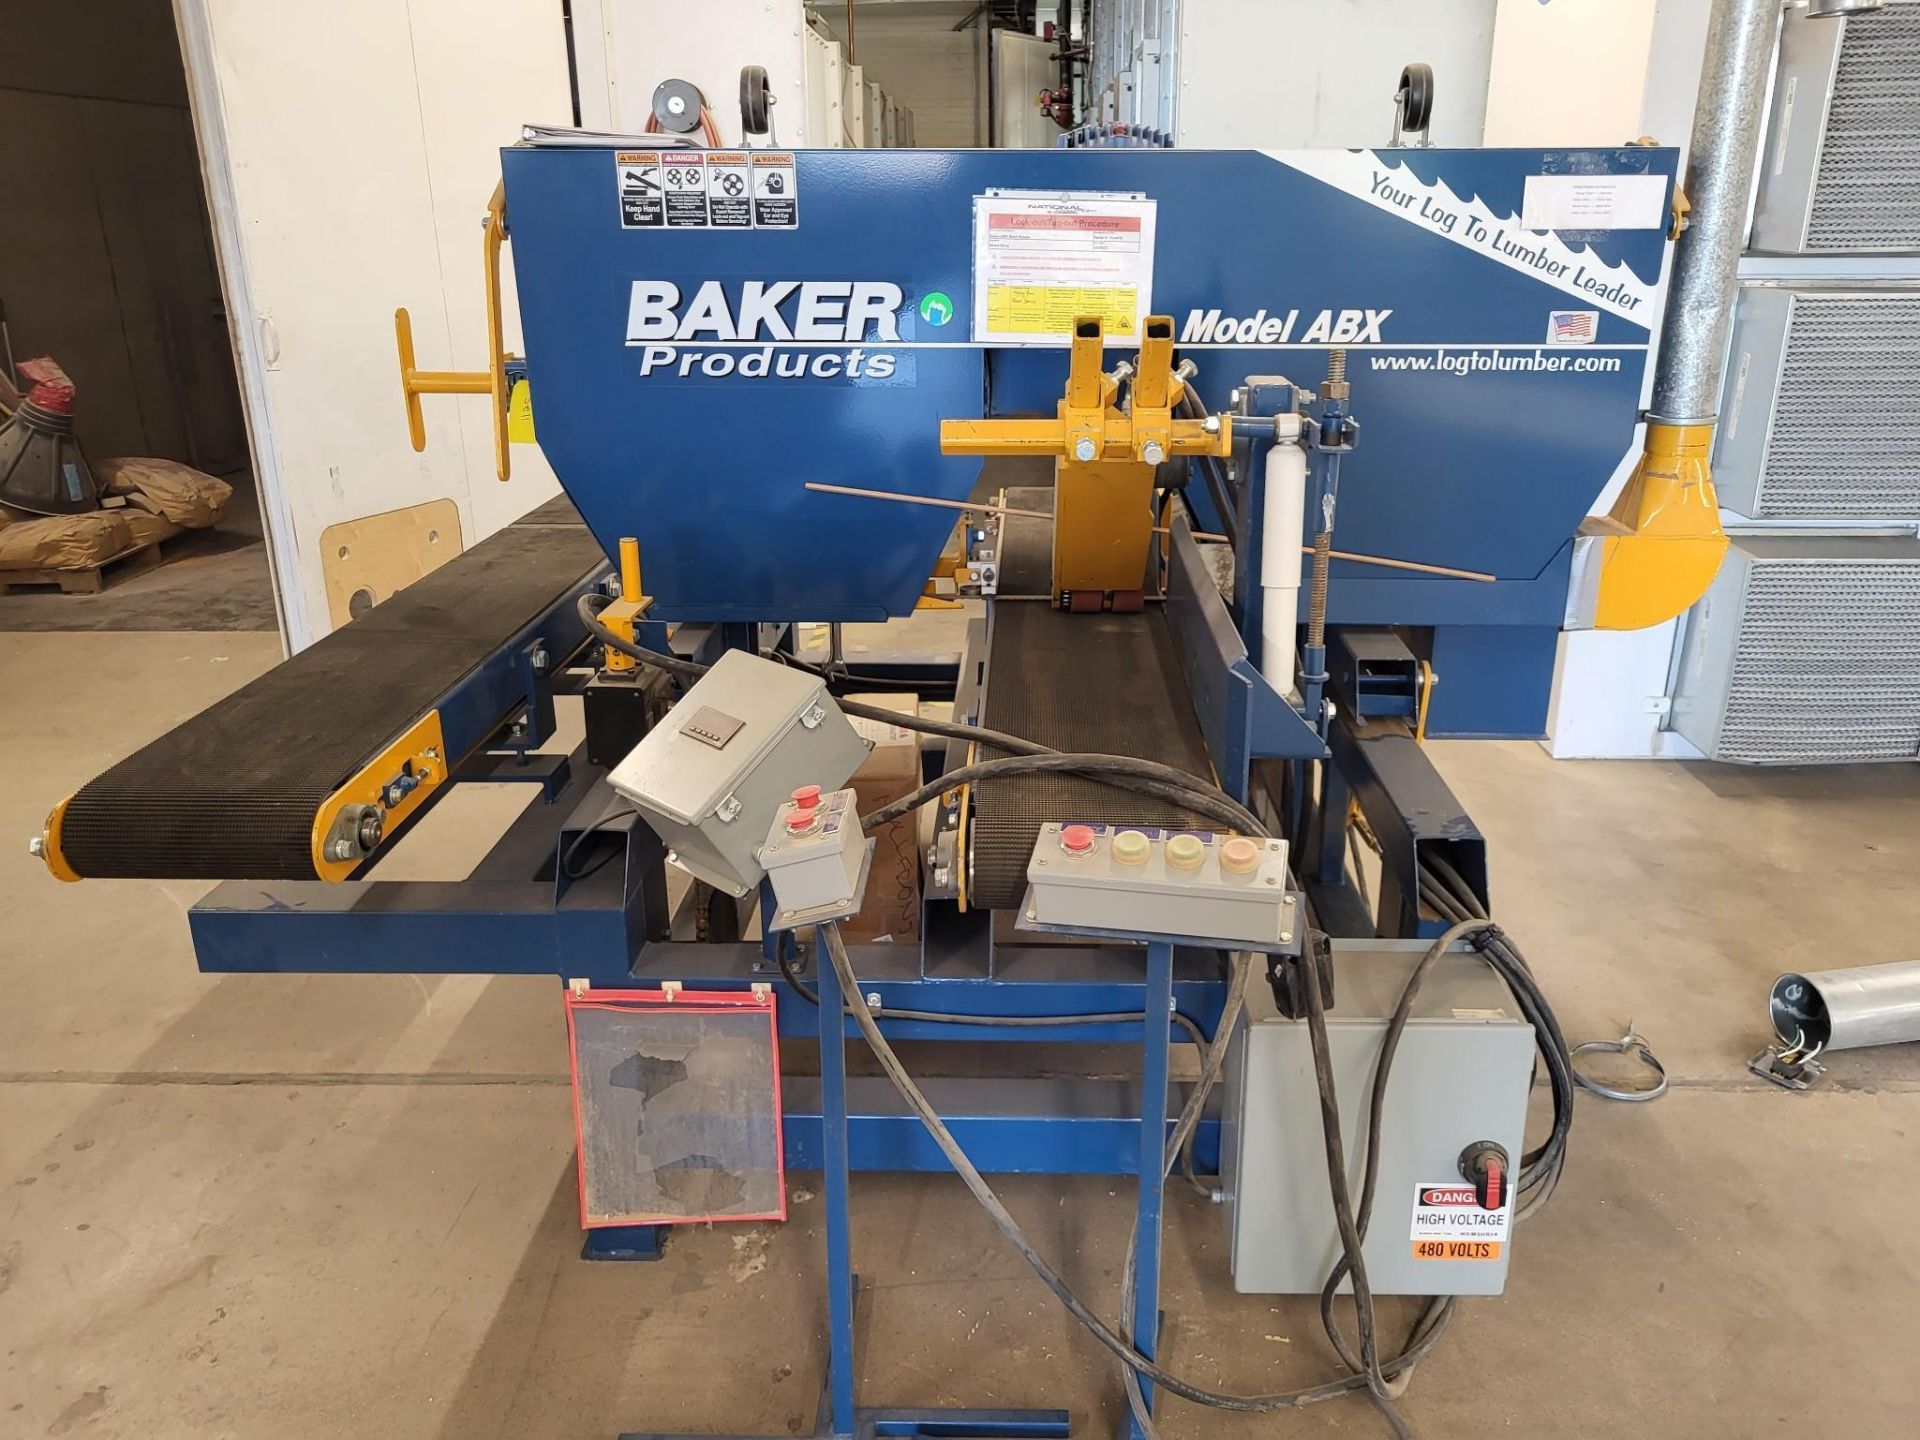 BAKER PRODUCTS MODEL ABX SINGLE HEAD RESAW BANDSAW